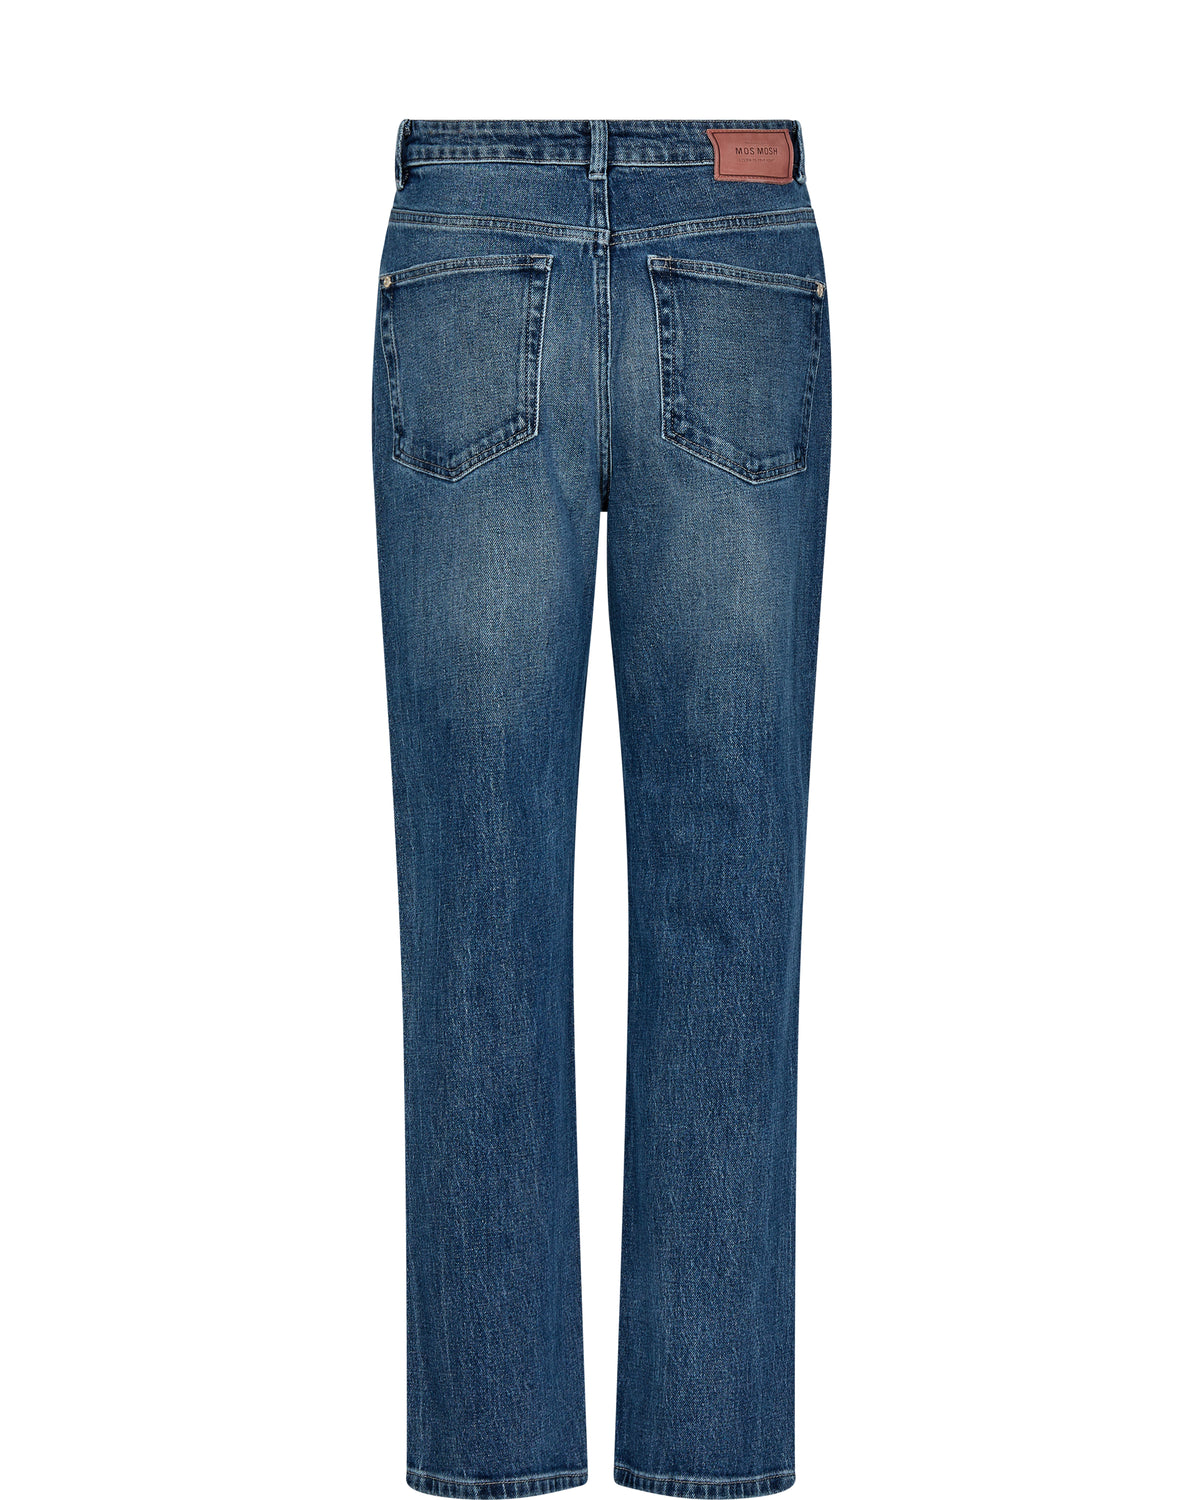 Blue vintage wash straight leg jeans with zip and button fly